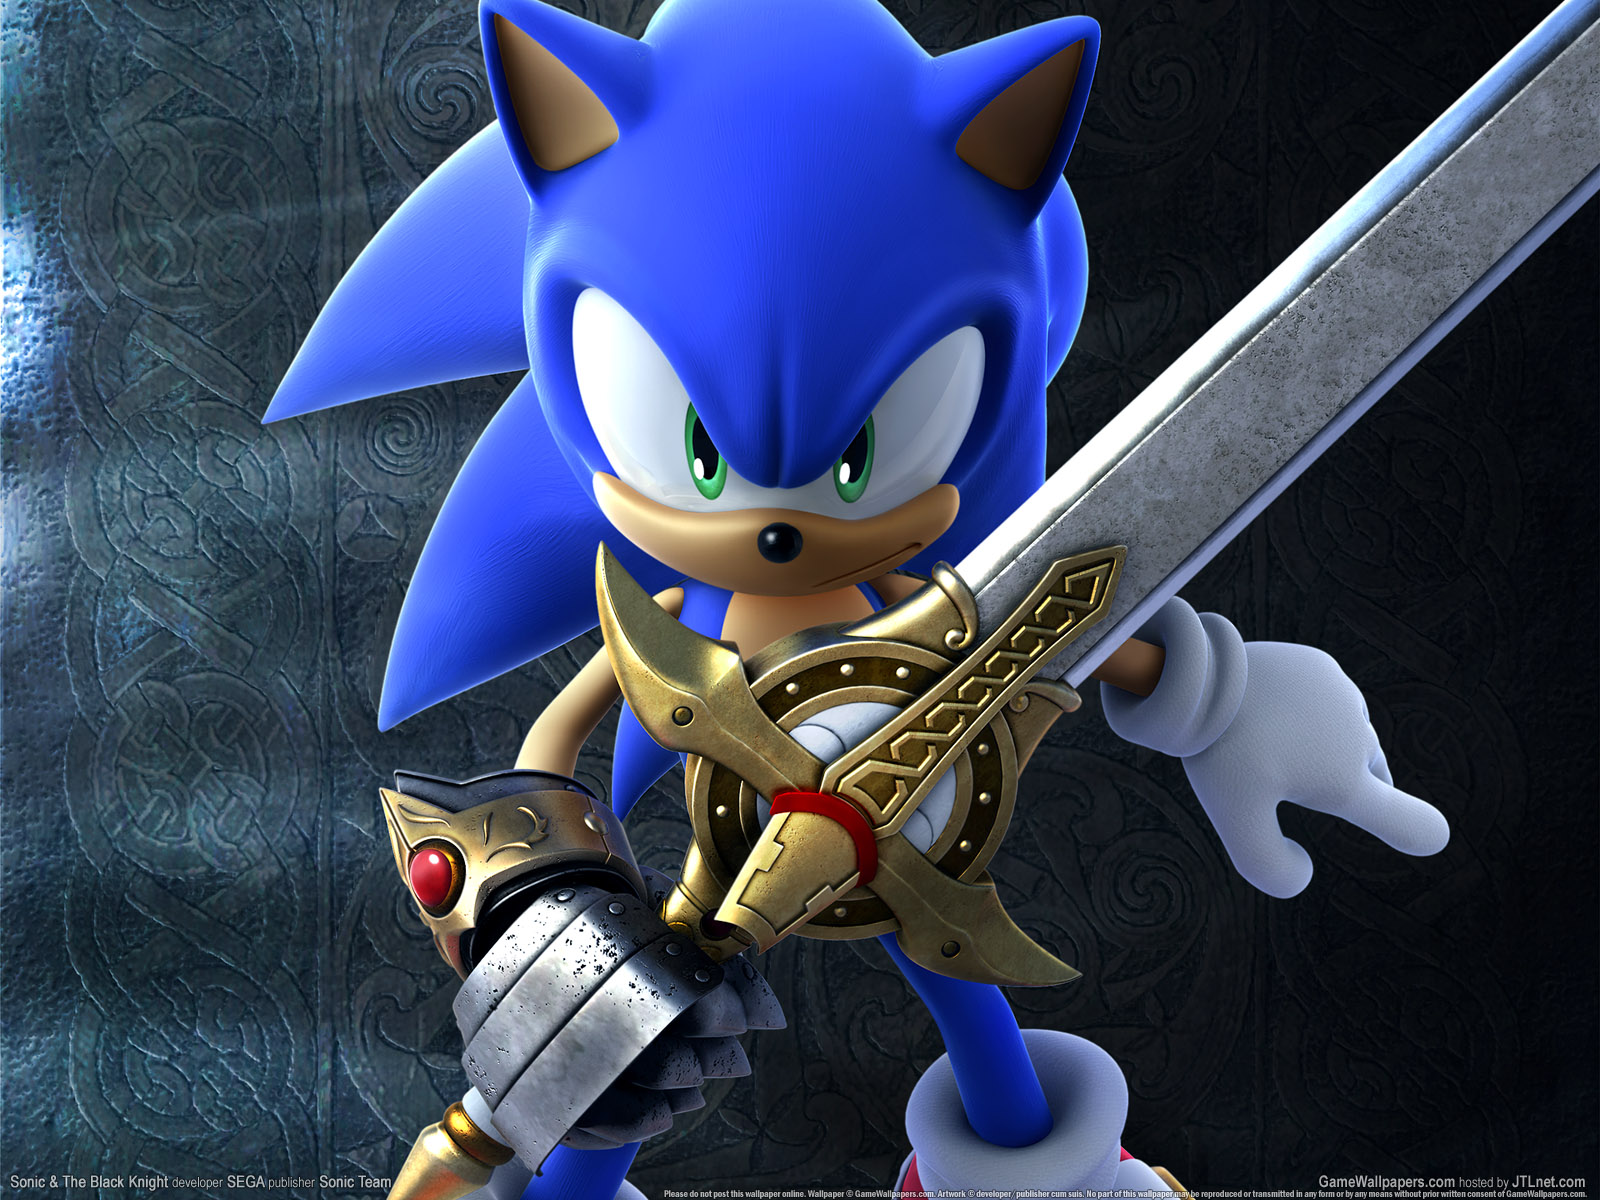 Sonic %2526 The Black Knight achtergrond 01 1600x1200